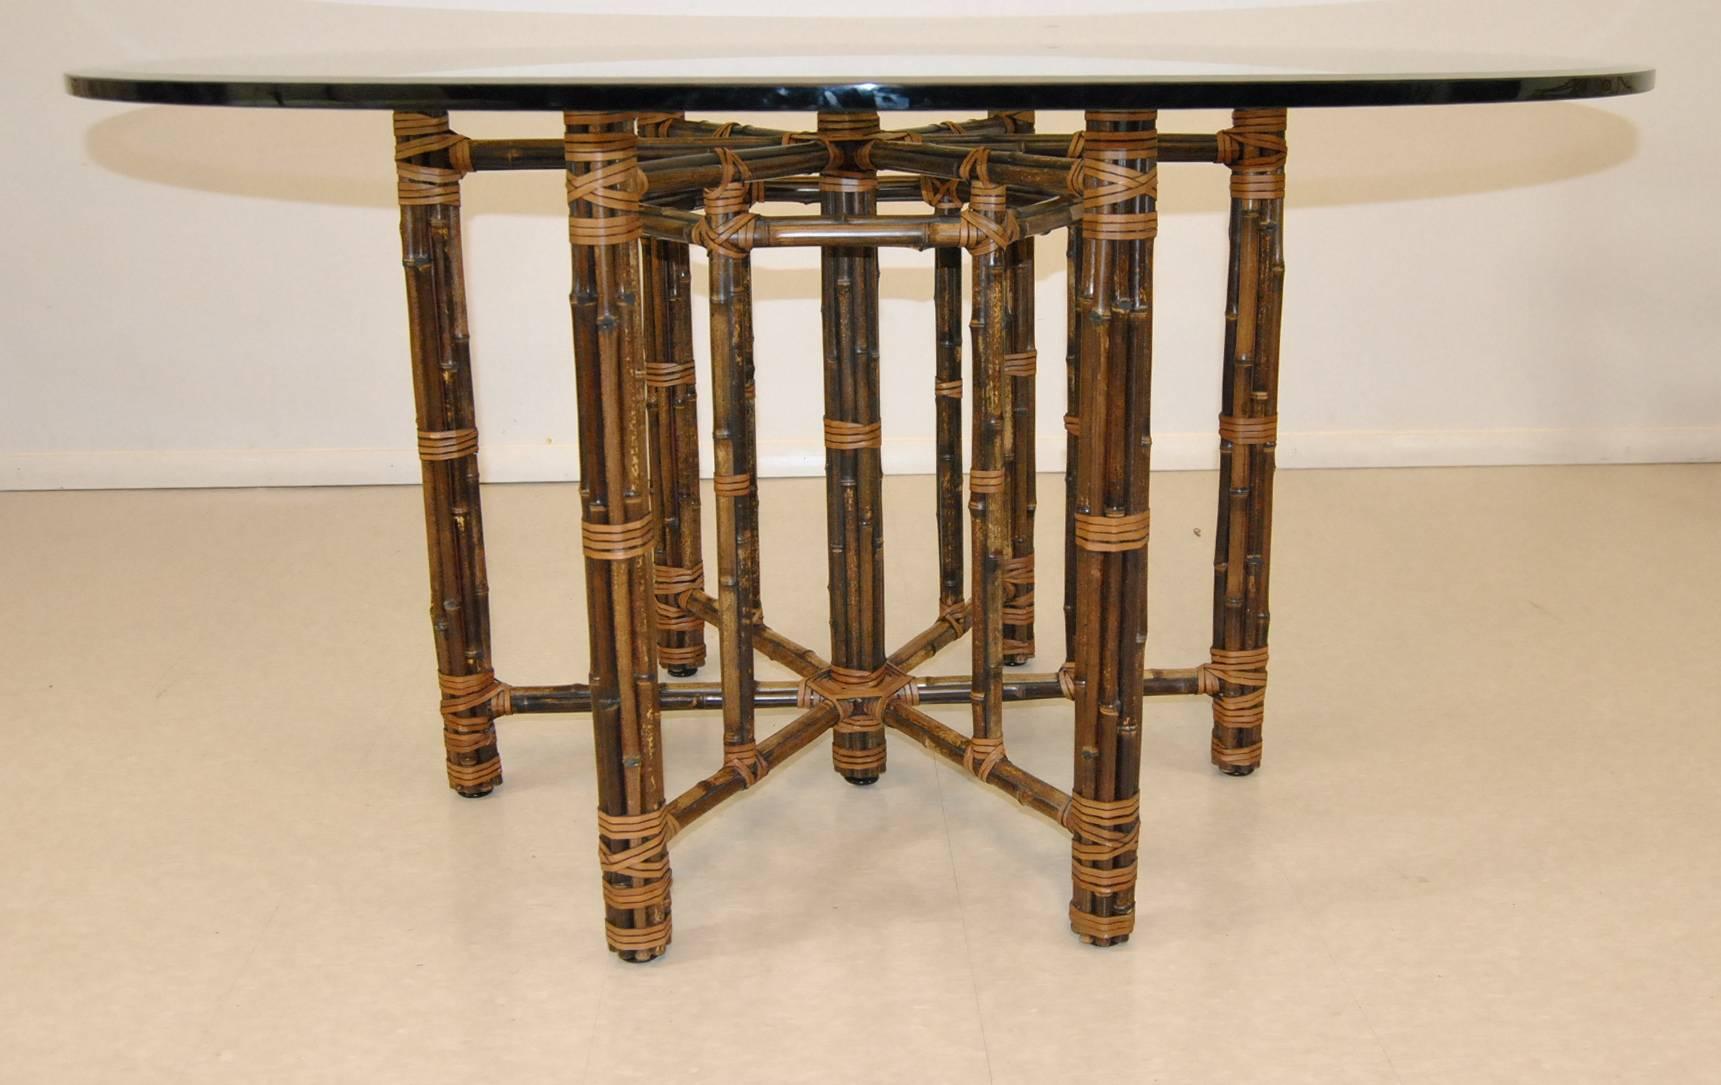 A beautiful glass top rattan dining table by McGuire. The bottom is a bamboo rattan base with lashings. The top is 54" diameter with a 1 inch beveled edge glass. This makes an excellent set with six target back chairs listed separately.